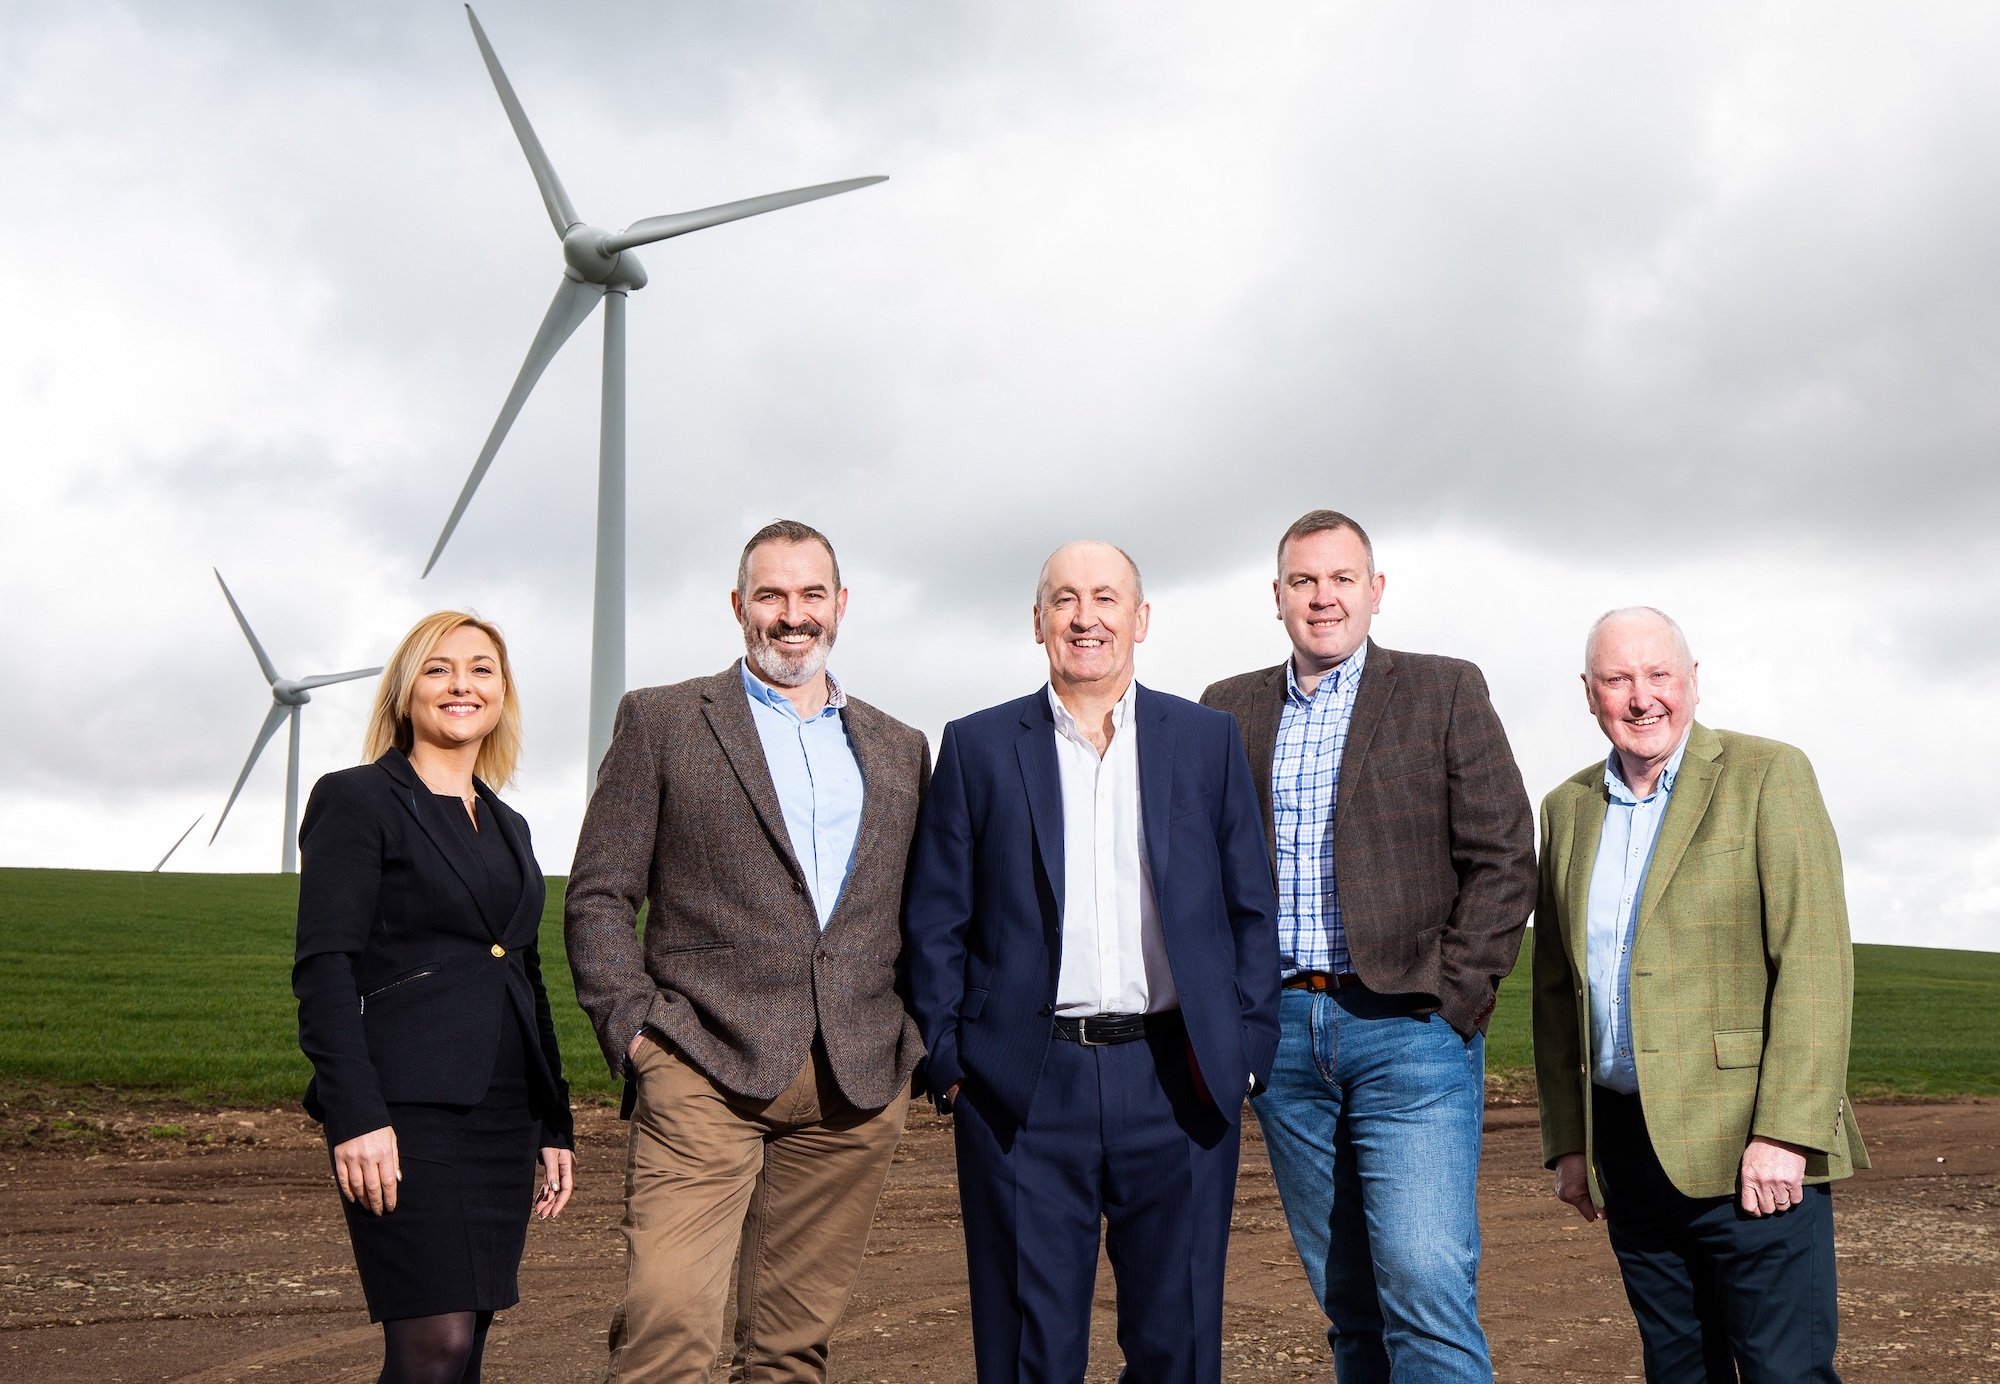 Aurora Energy aims for £100m turnover with expansion into renewables and oil & gas